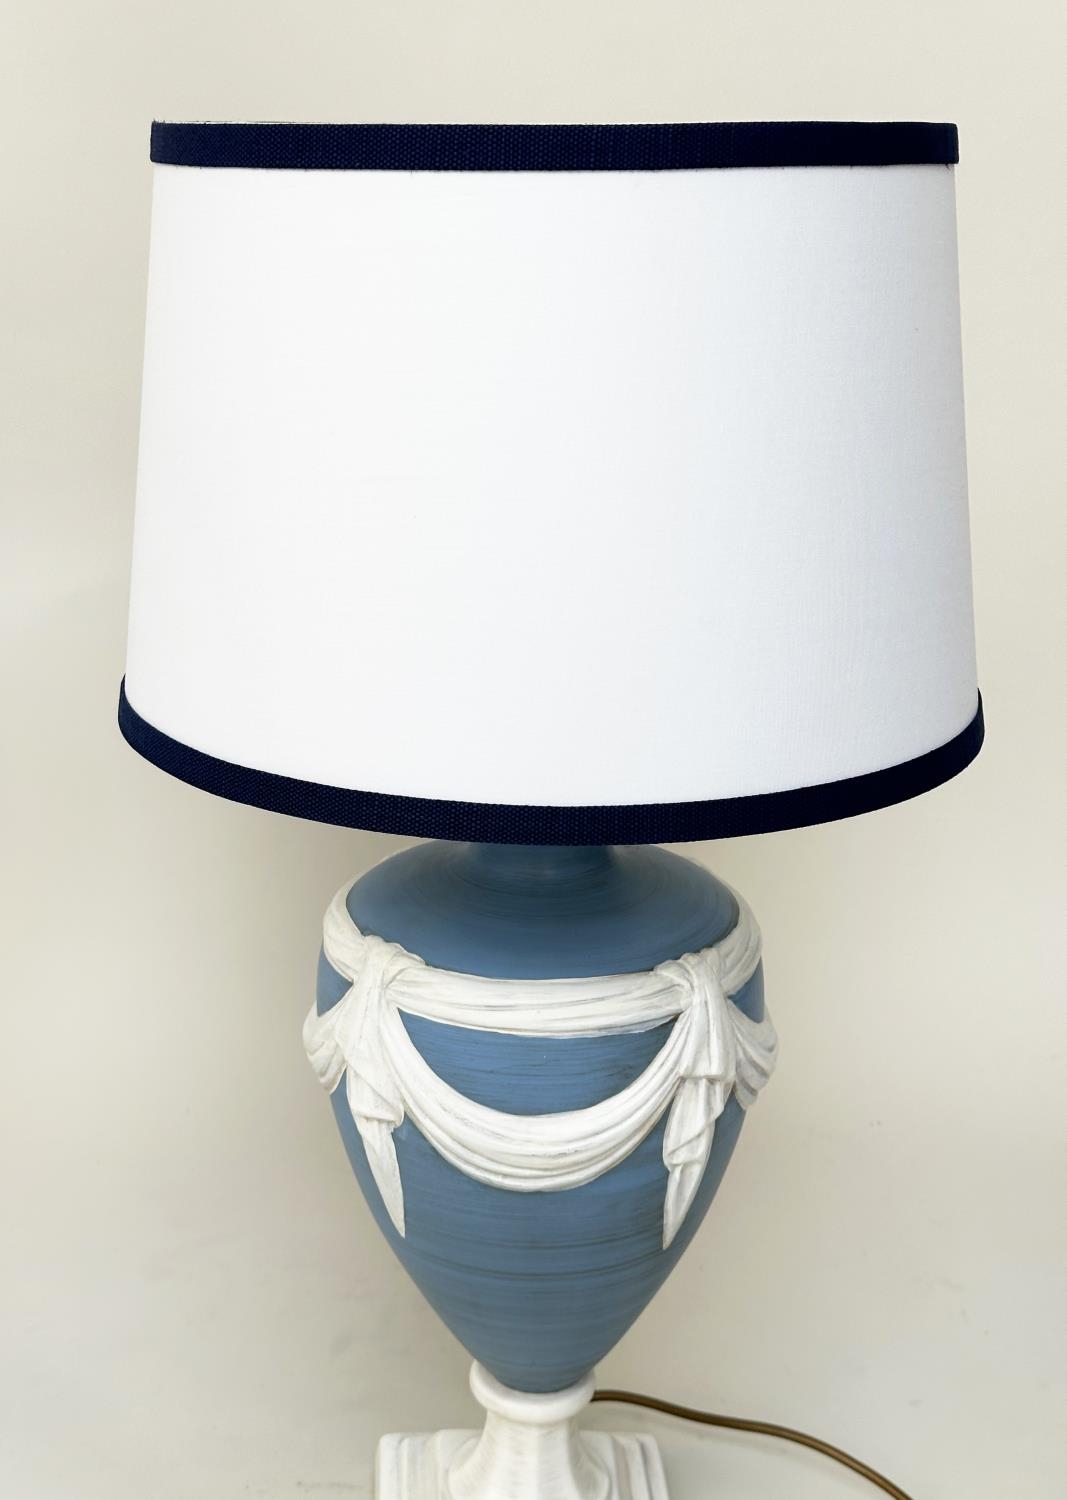 TABLE LAMPS, a pair, Wedgwood jasperware style of vase form with shades, 70cm H. - Image 12 of 12